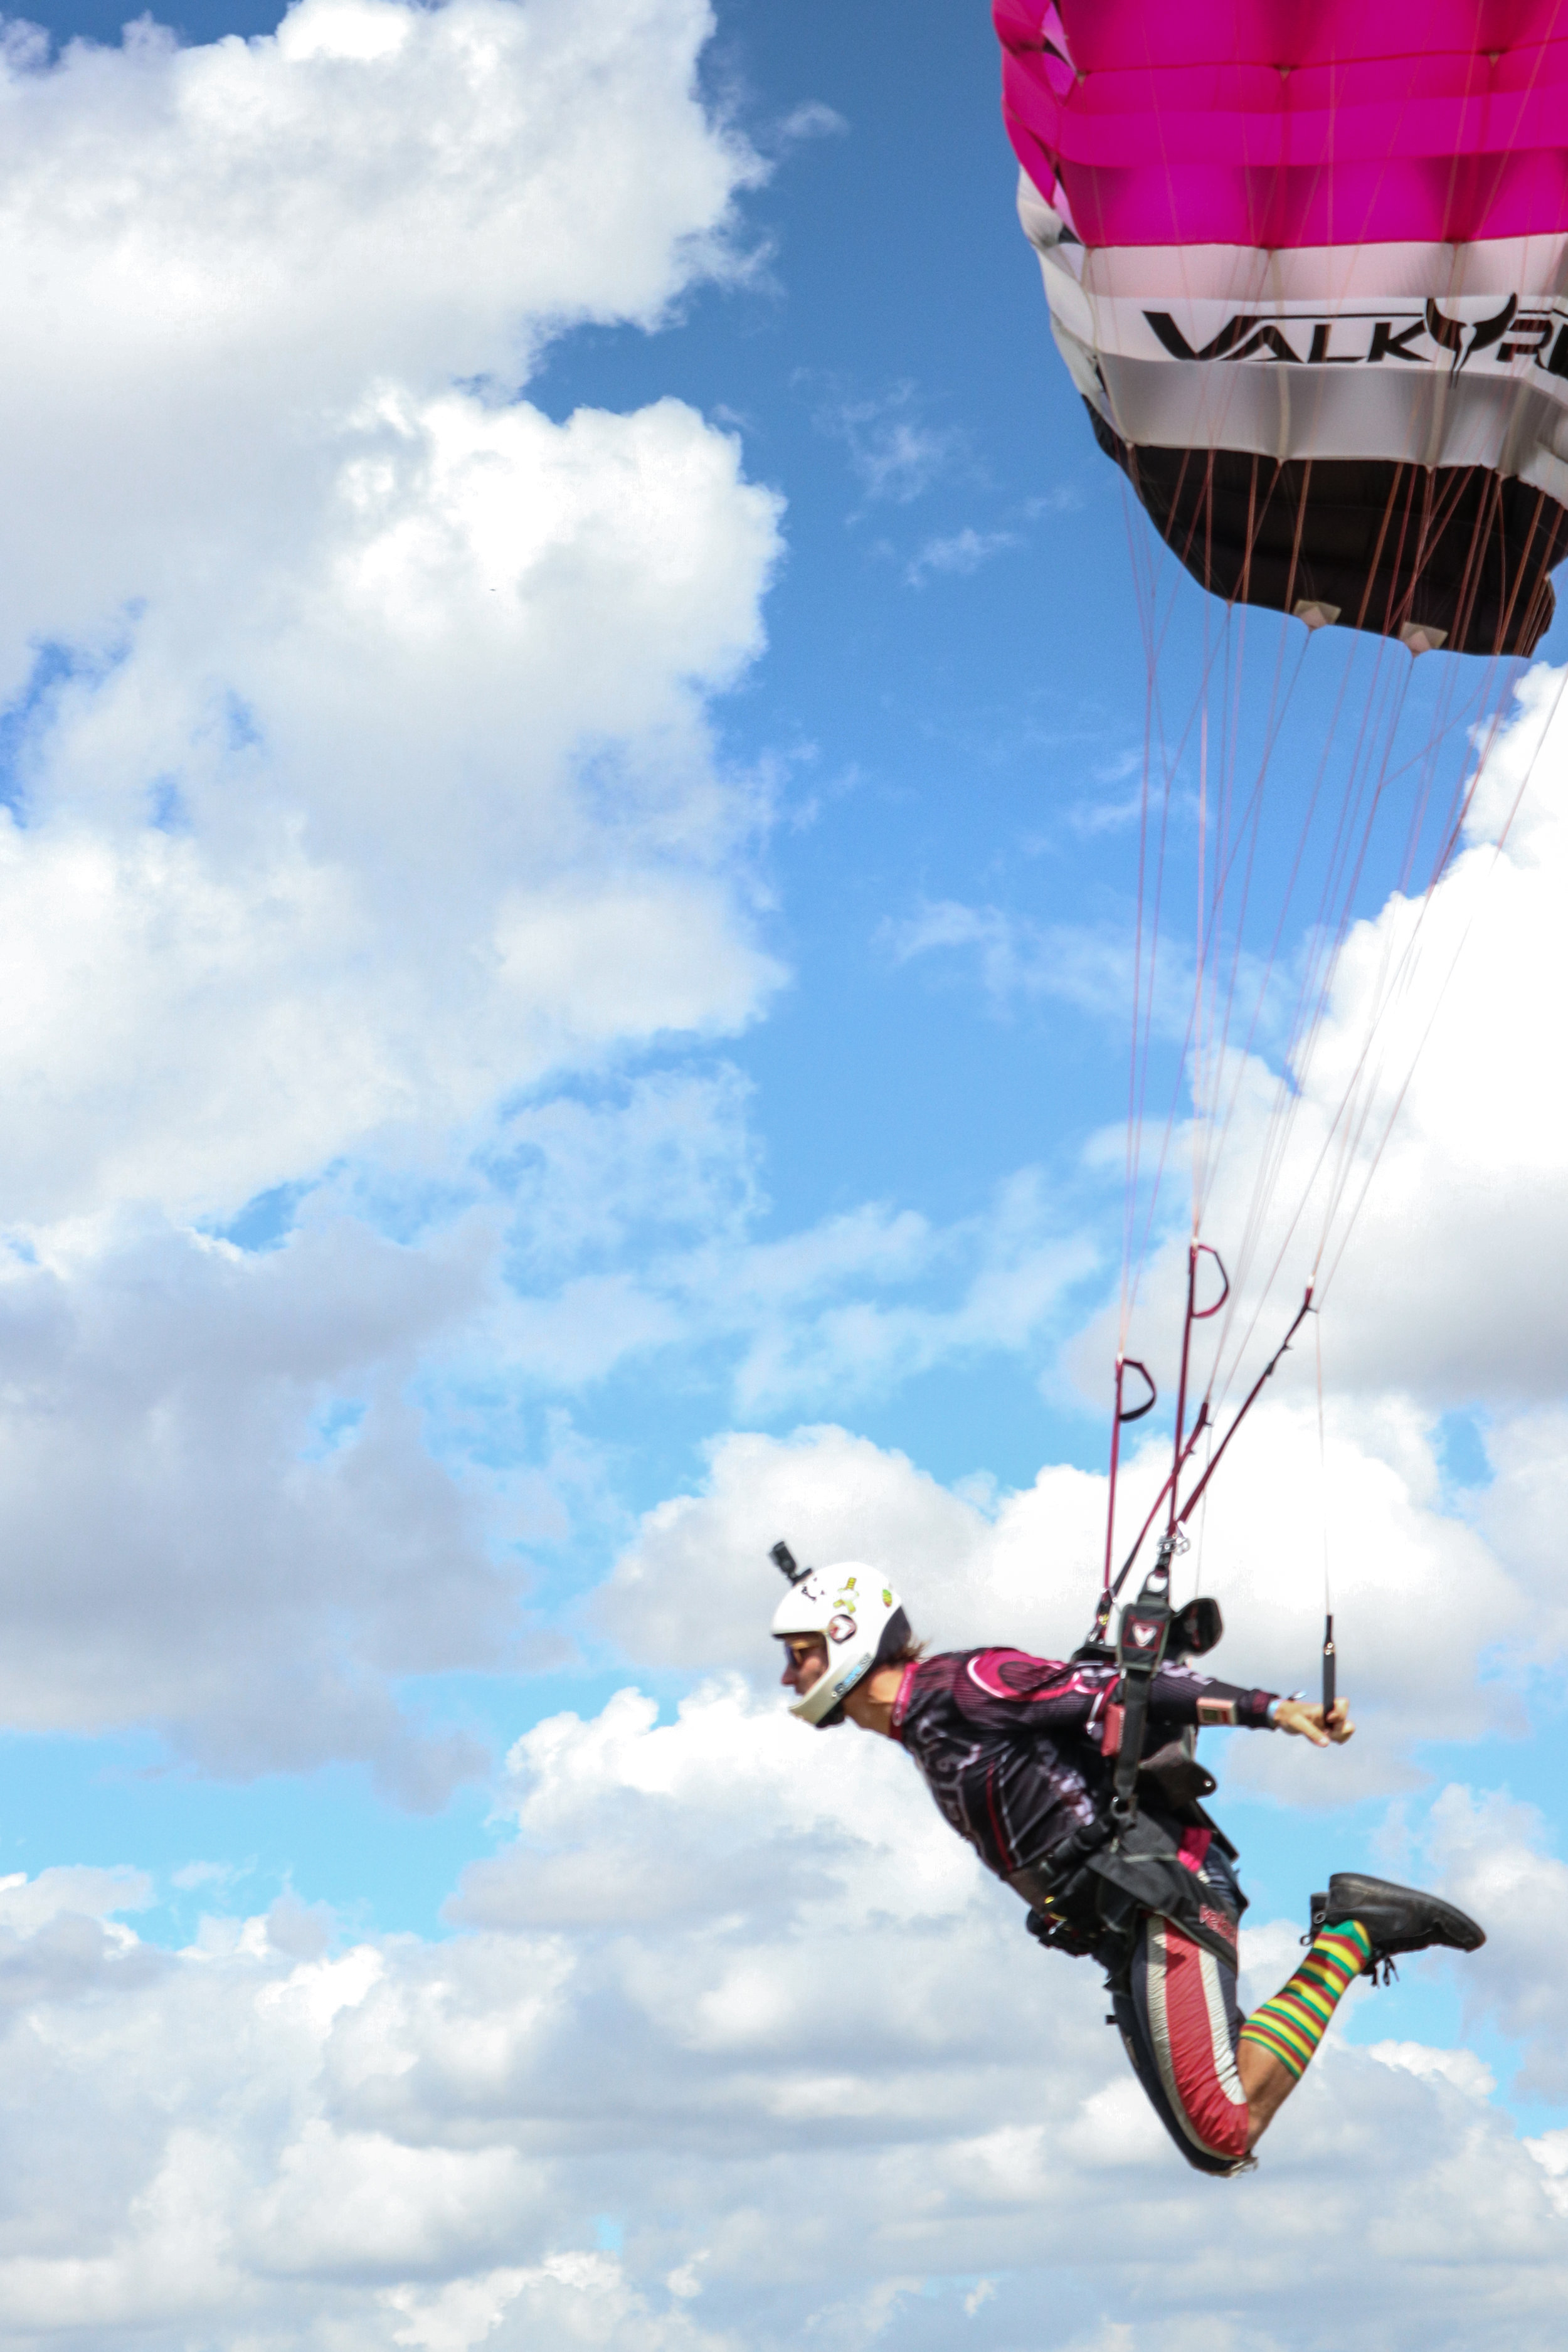 High-Kick-Photography-Skydiving-Canopy-Piloting-Swoop-High-Performance-Parachute-Skydive-City-Zephyrhills-ZHills-Florida-Sports-Active-Competition-LR-8.jpg